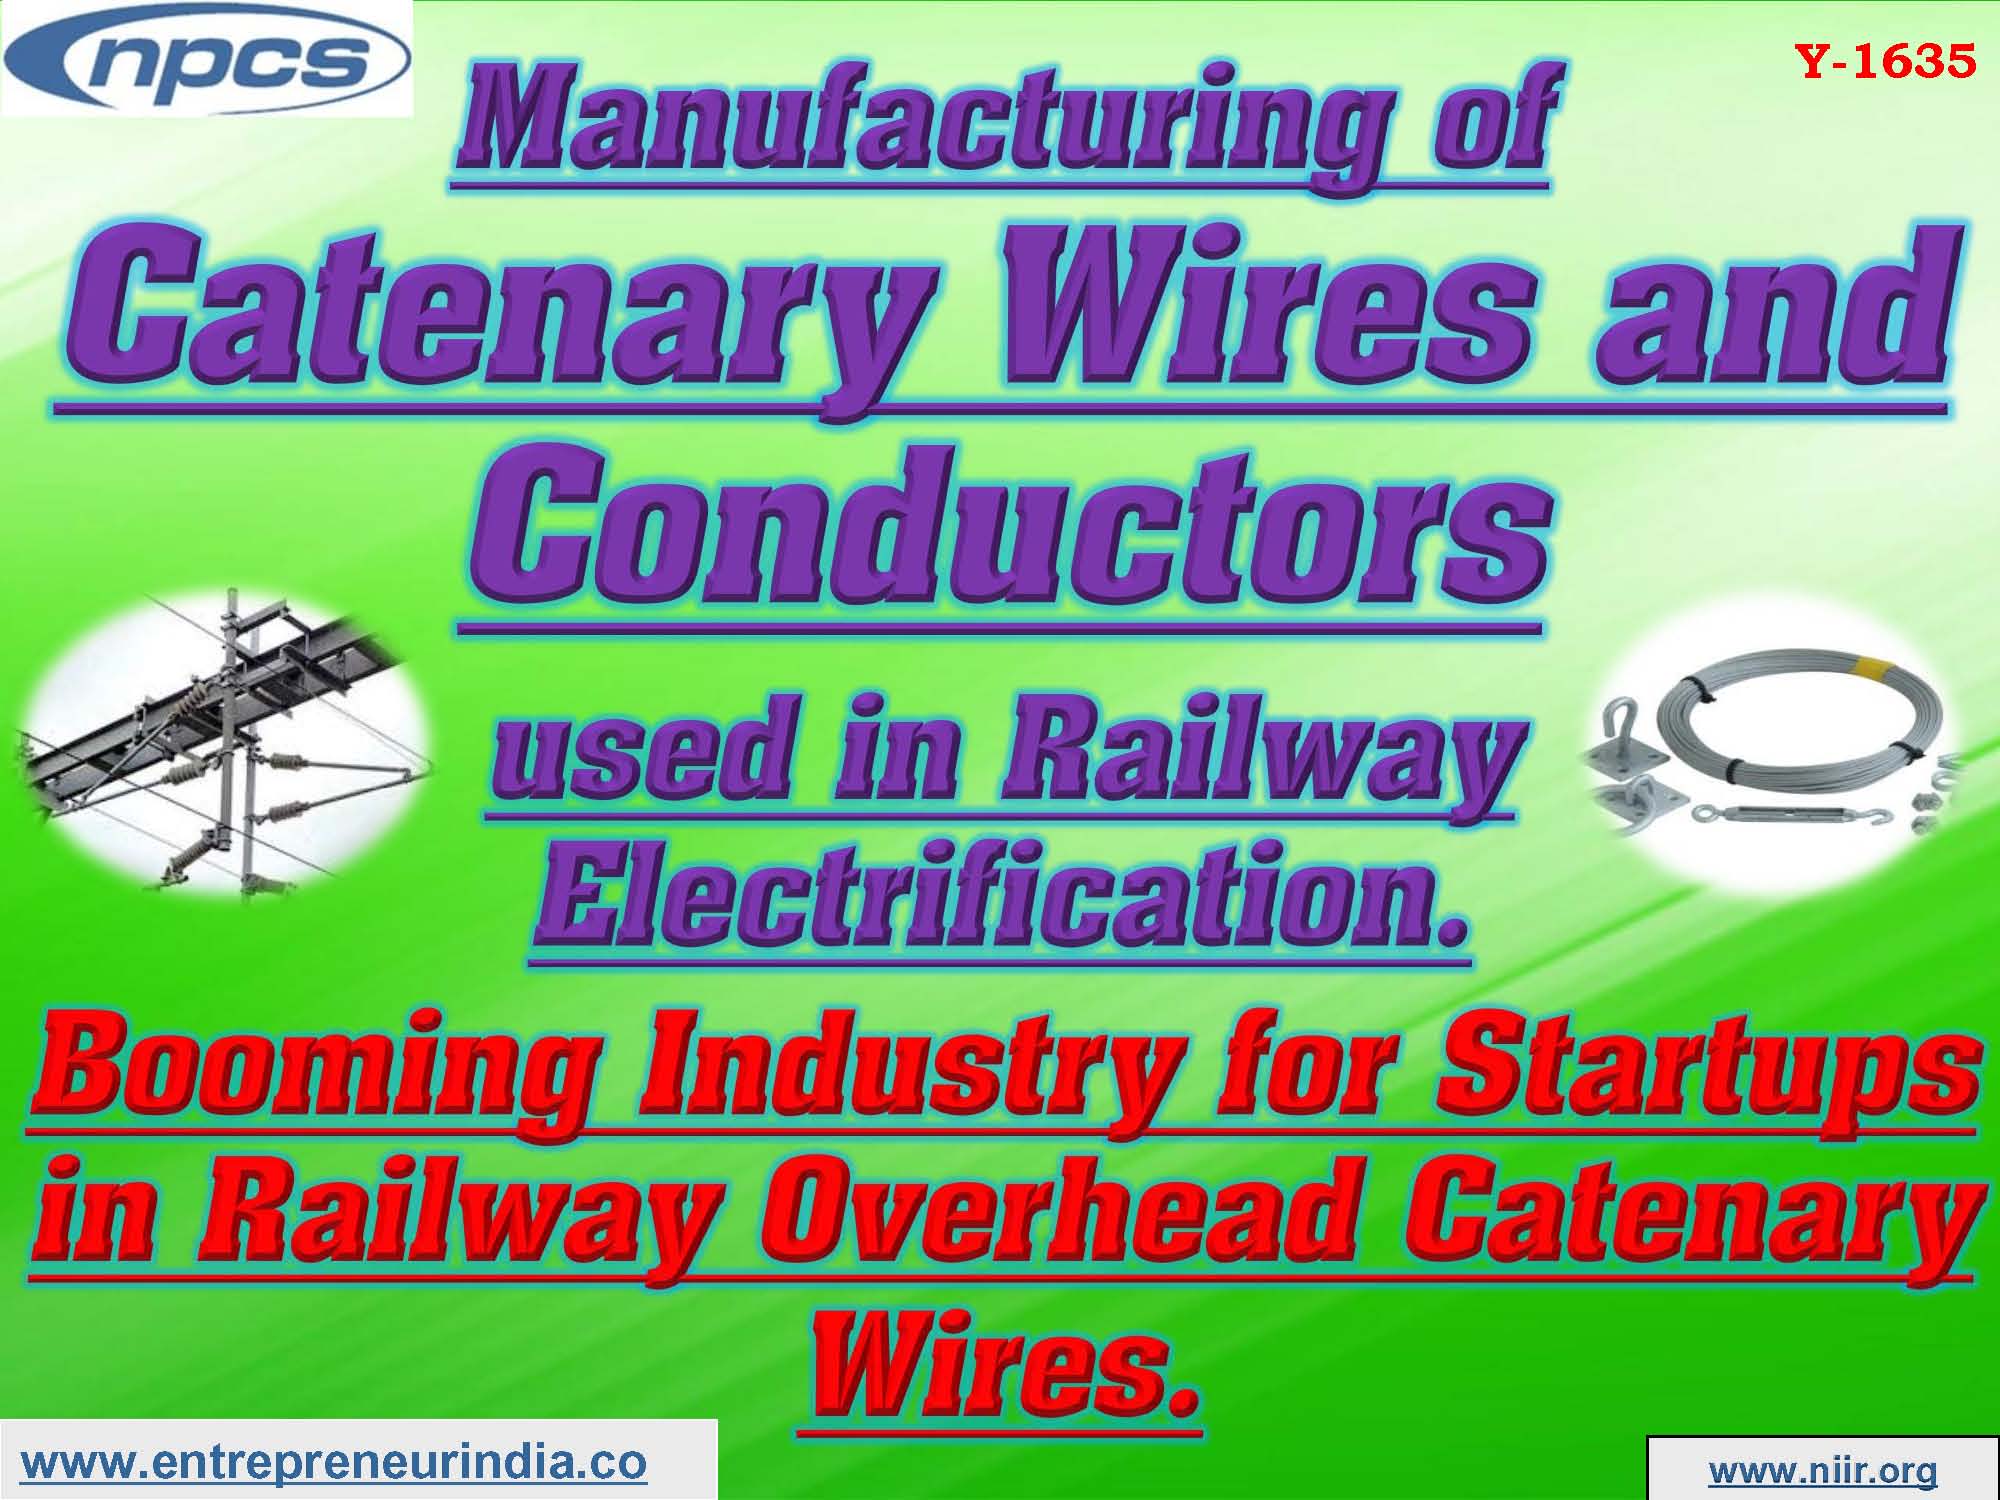 Manufacturing of Catenary Wires and Conductors used in Railway Electrification